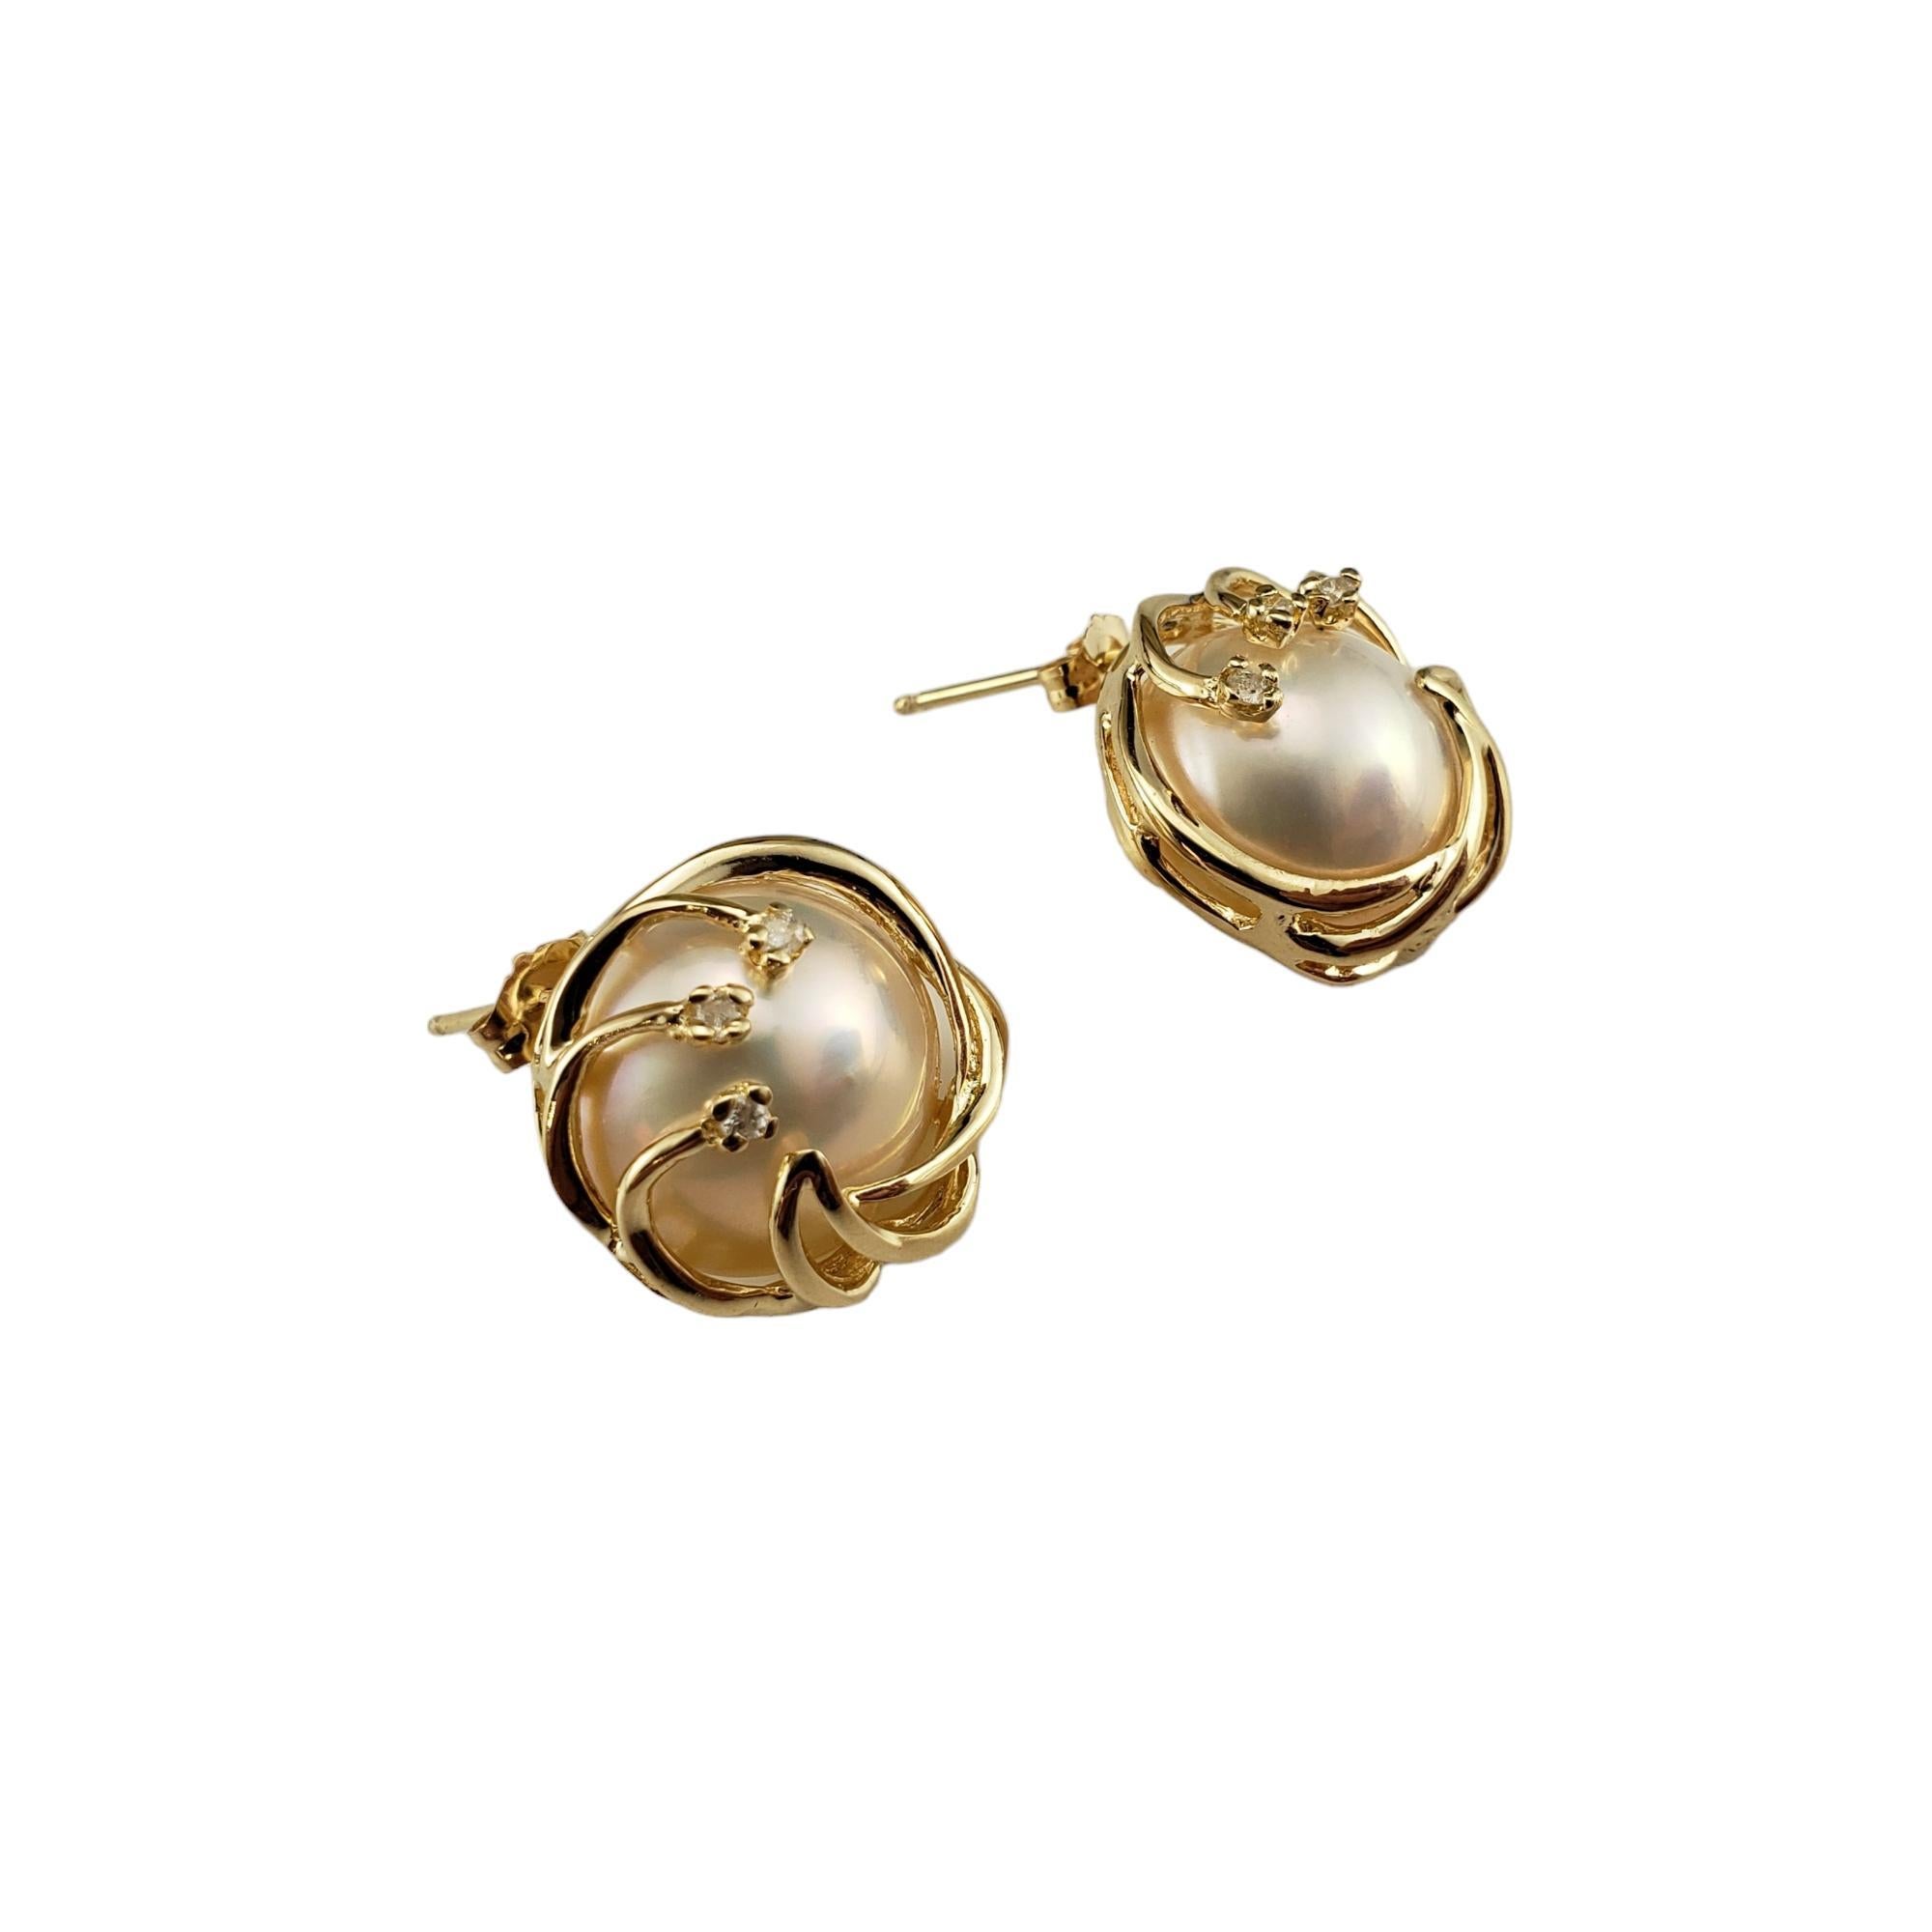 14 Karat Yellow Gold Mabe Pearl and Diamond Earrings-

These elegant earrings each feature one Mabe pearl and three round single cut diamonds set in classic 14K yellow gold.  Push back closures.

Matching ring: #16725
Matching pendant: